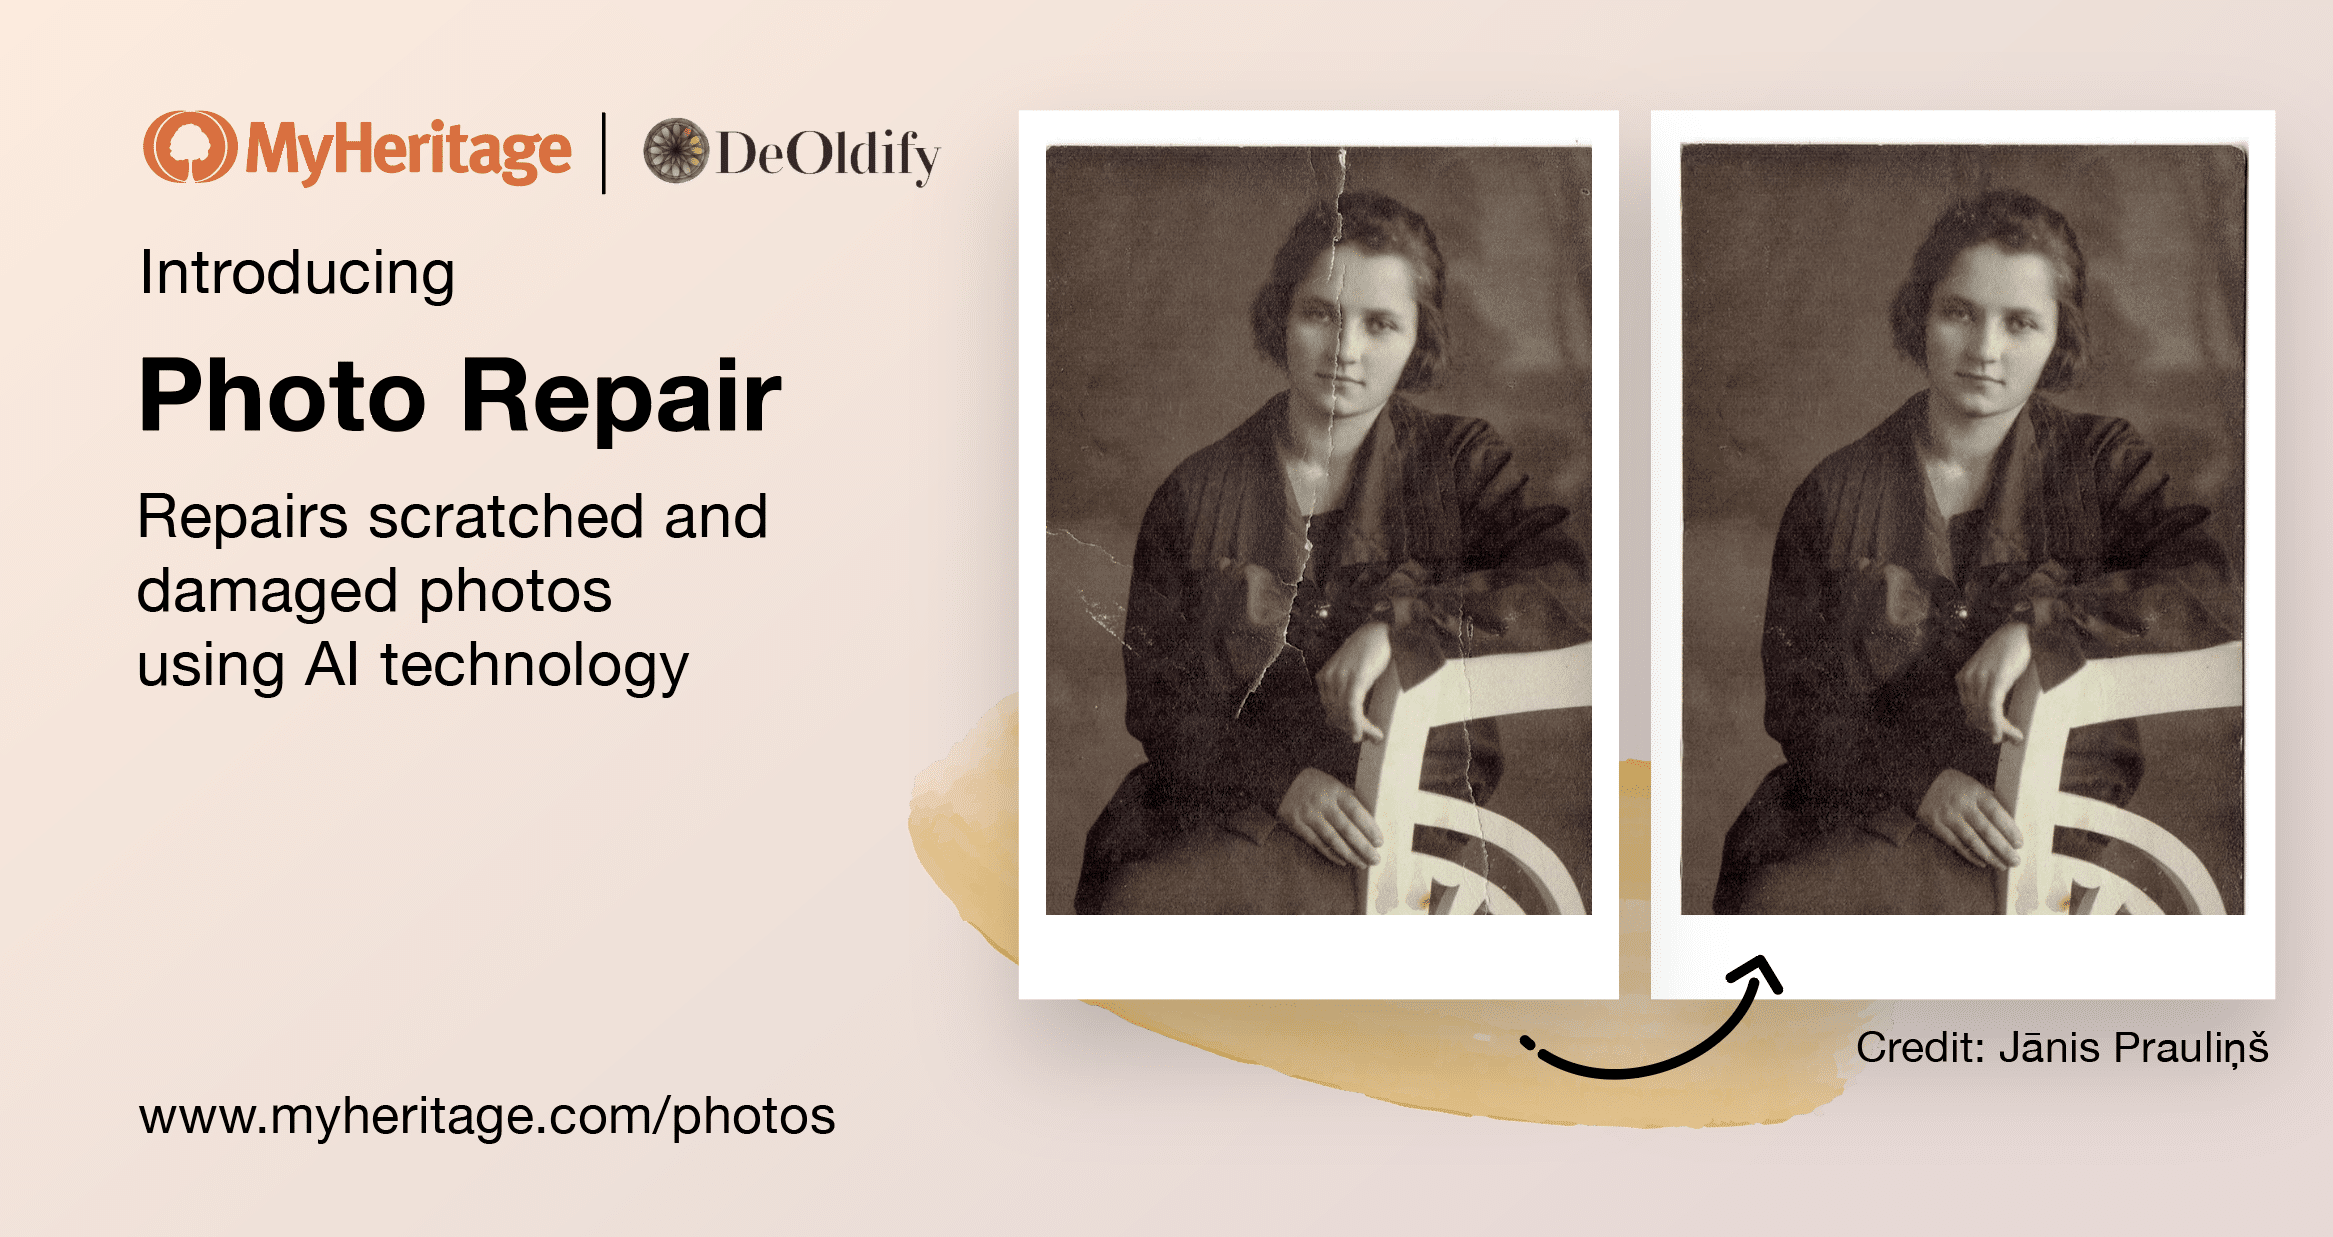 Introducing Photo Repair: New Feature to Automagically Fix Scratched and Damaged Photos